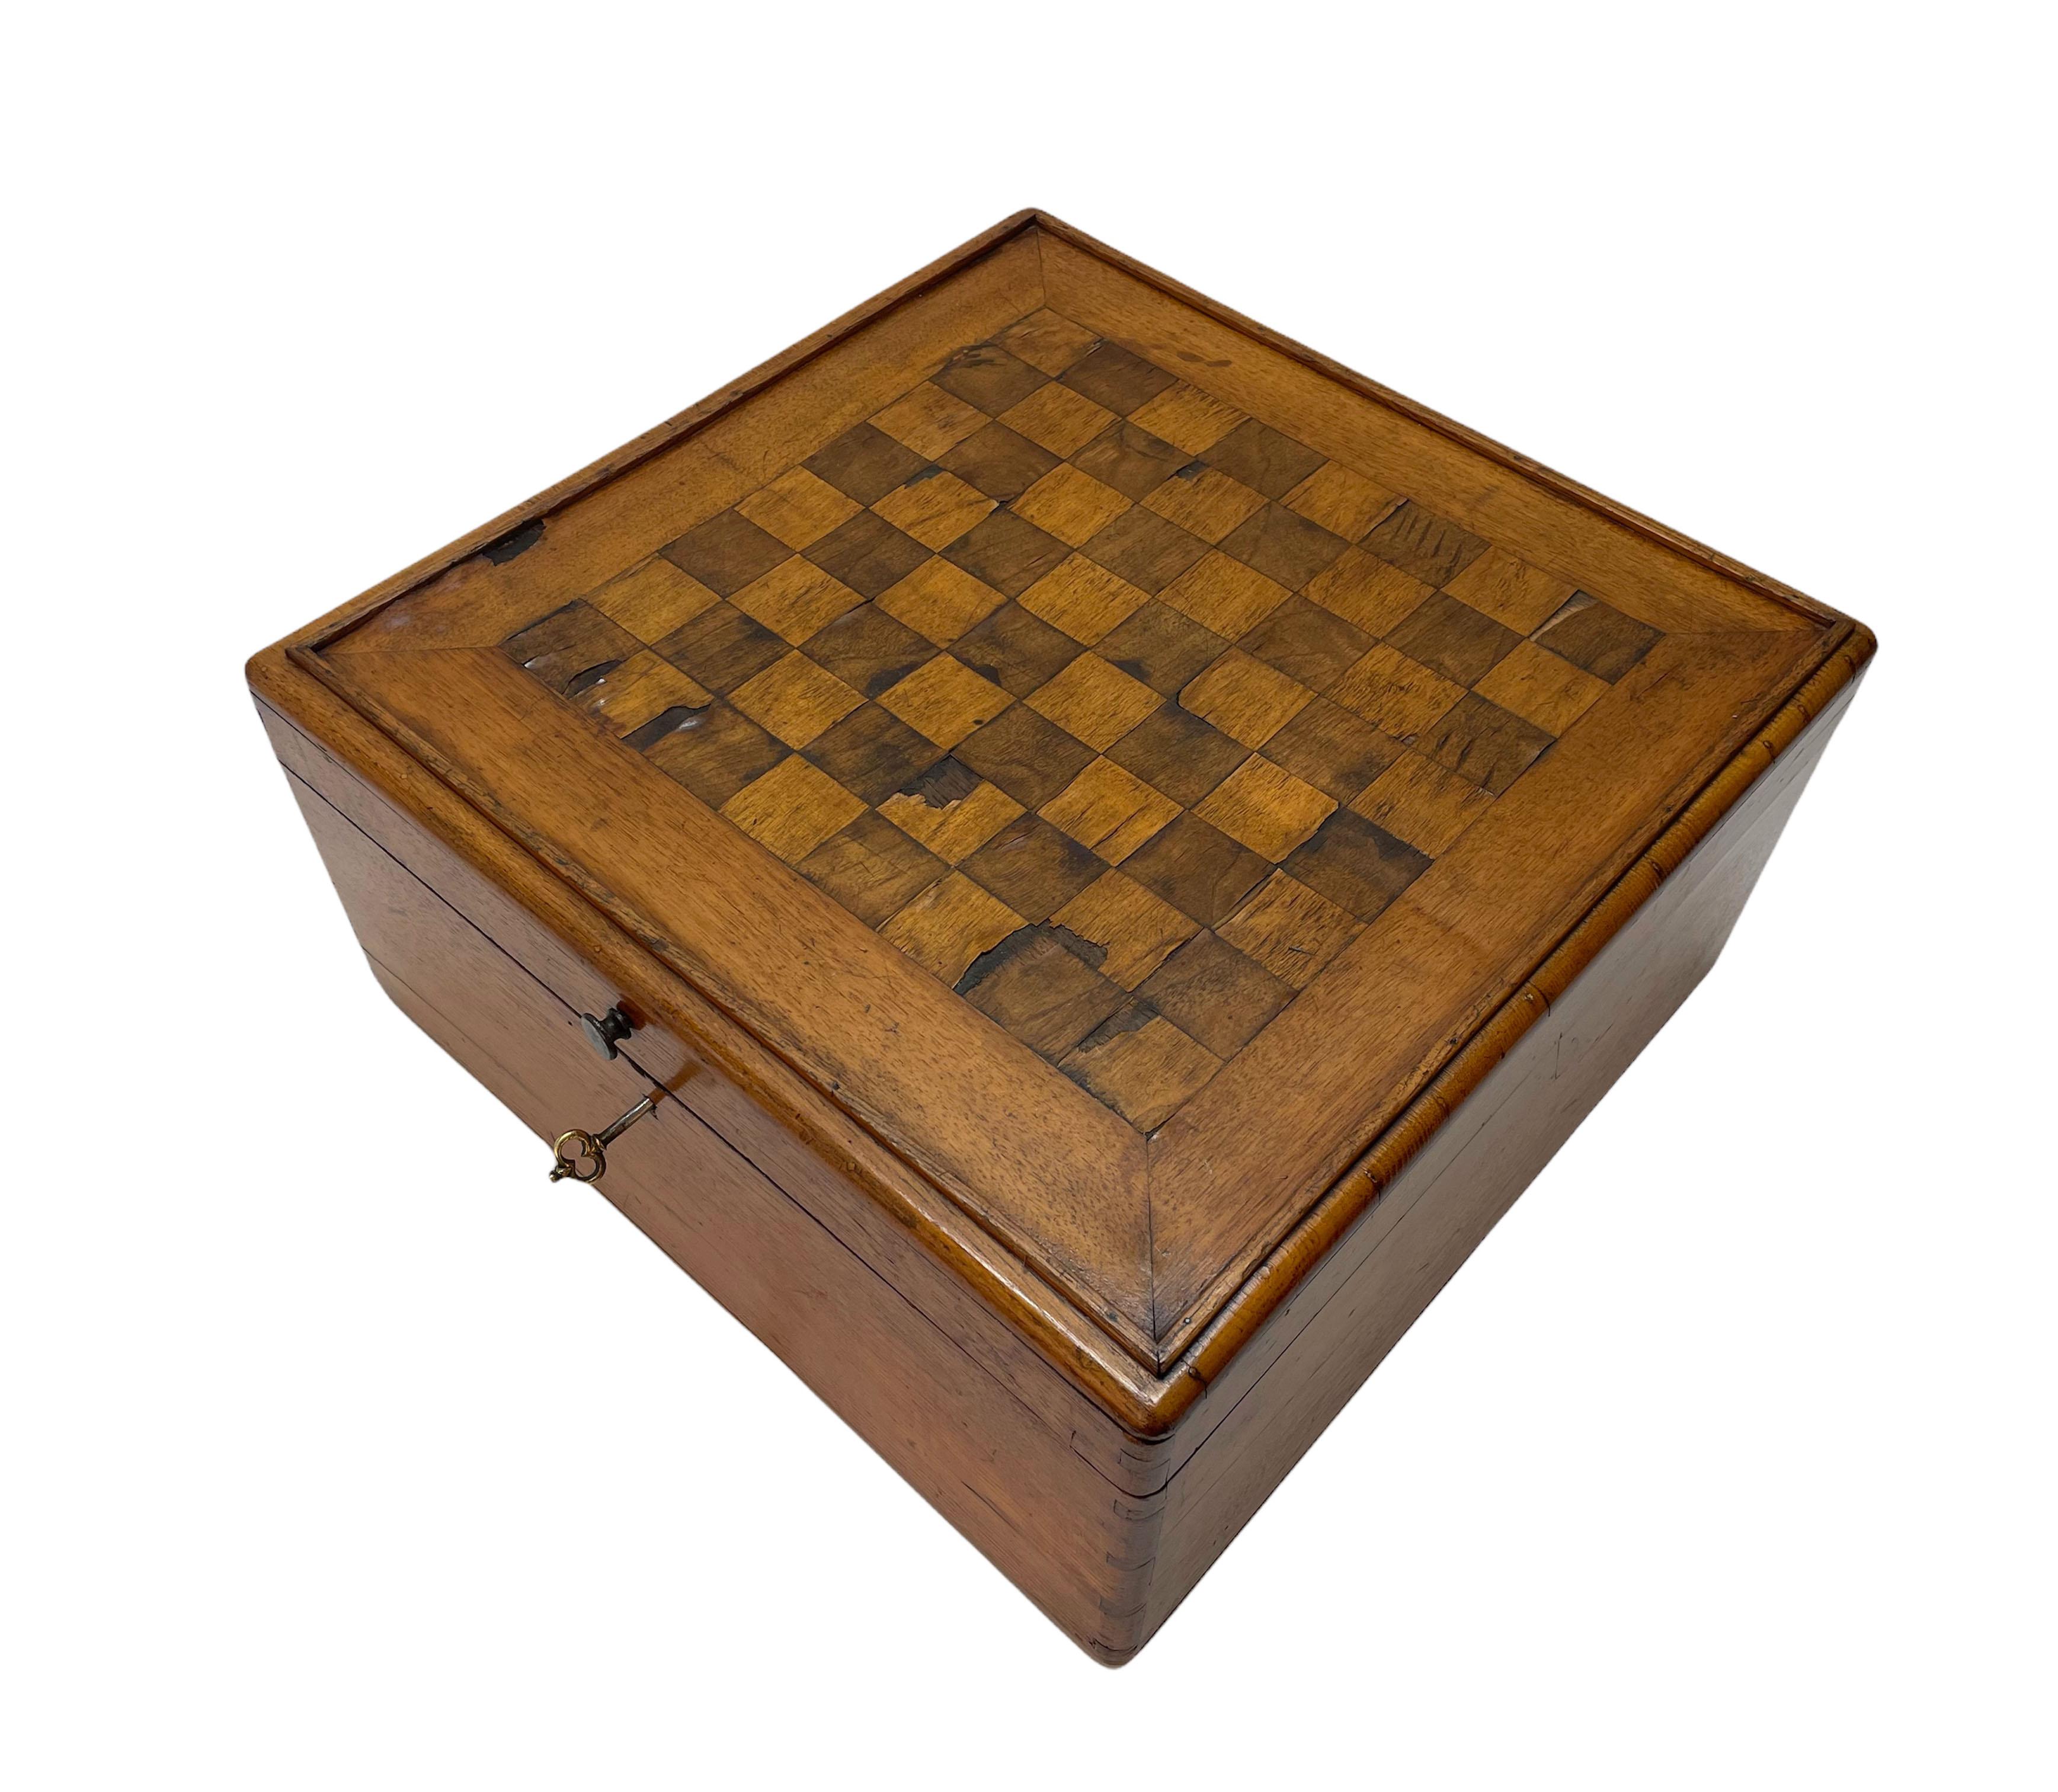 Early 20th Century Large Wooden Inlaid Squared Italian Chessboard Box, 1900s For Sale 2